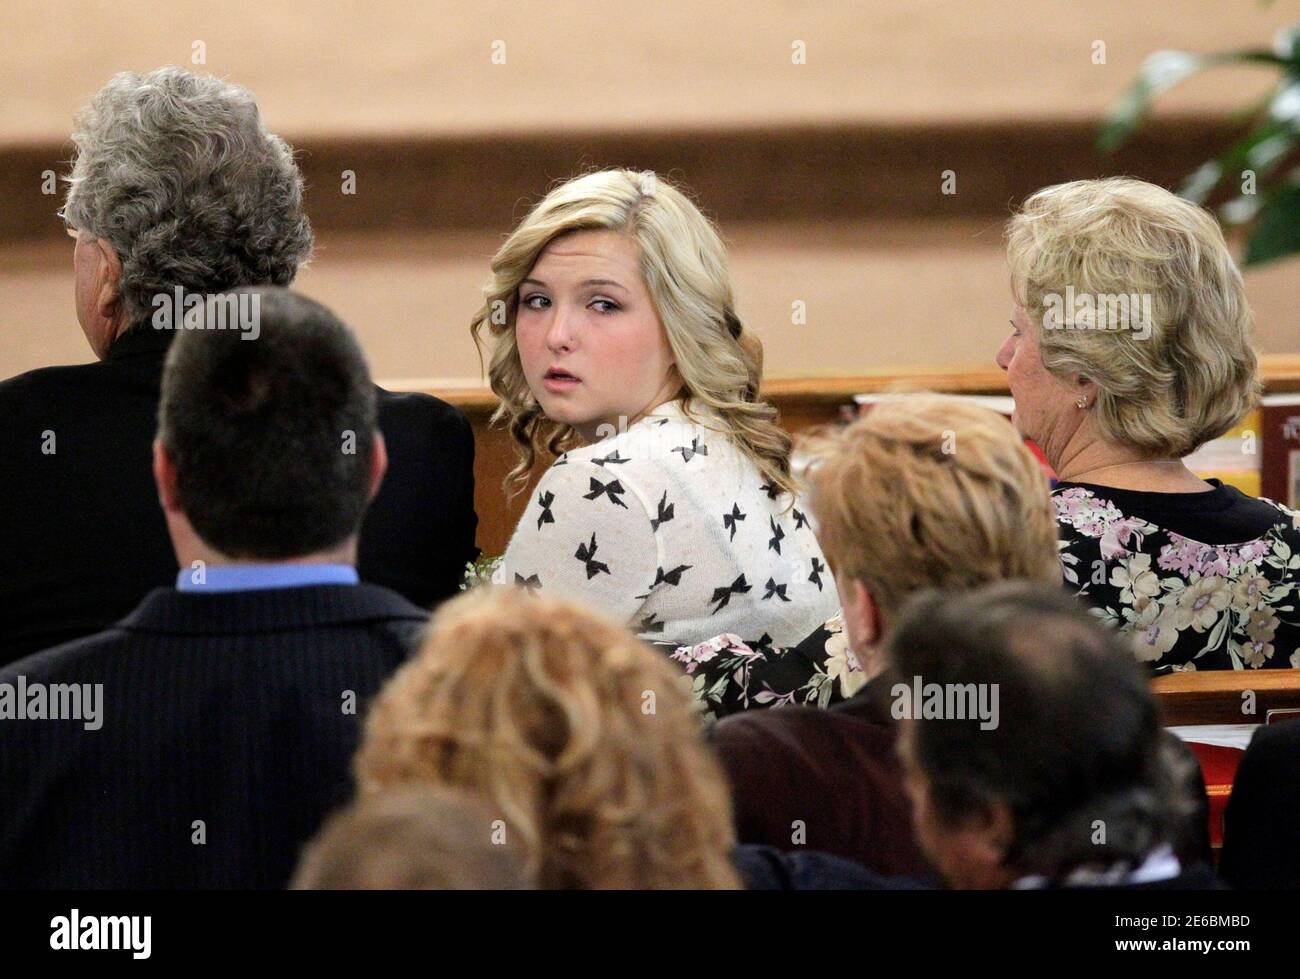 Kidnap victim Hannah Anderson (C) sits with her grand parents Ralph and  Sara Britt as they attend a memorial service for her mother Christina  Anderson, 44, and her 8-year-old brother Ethan at